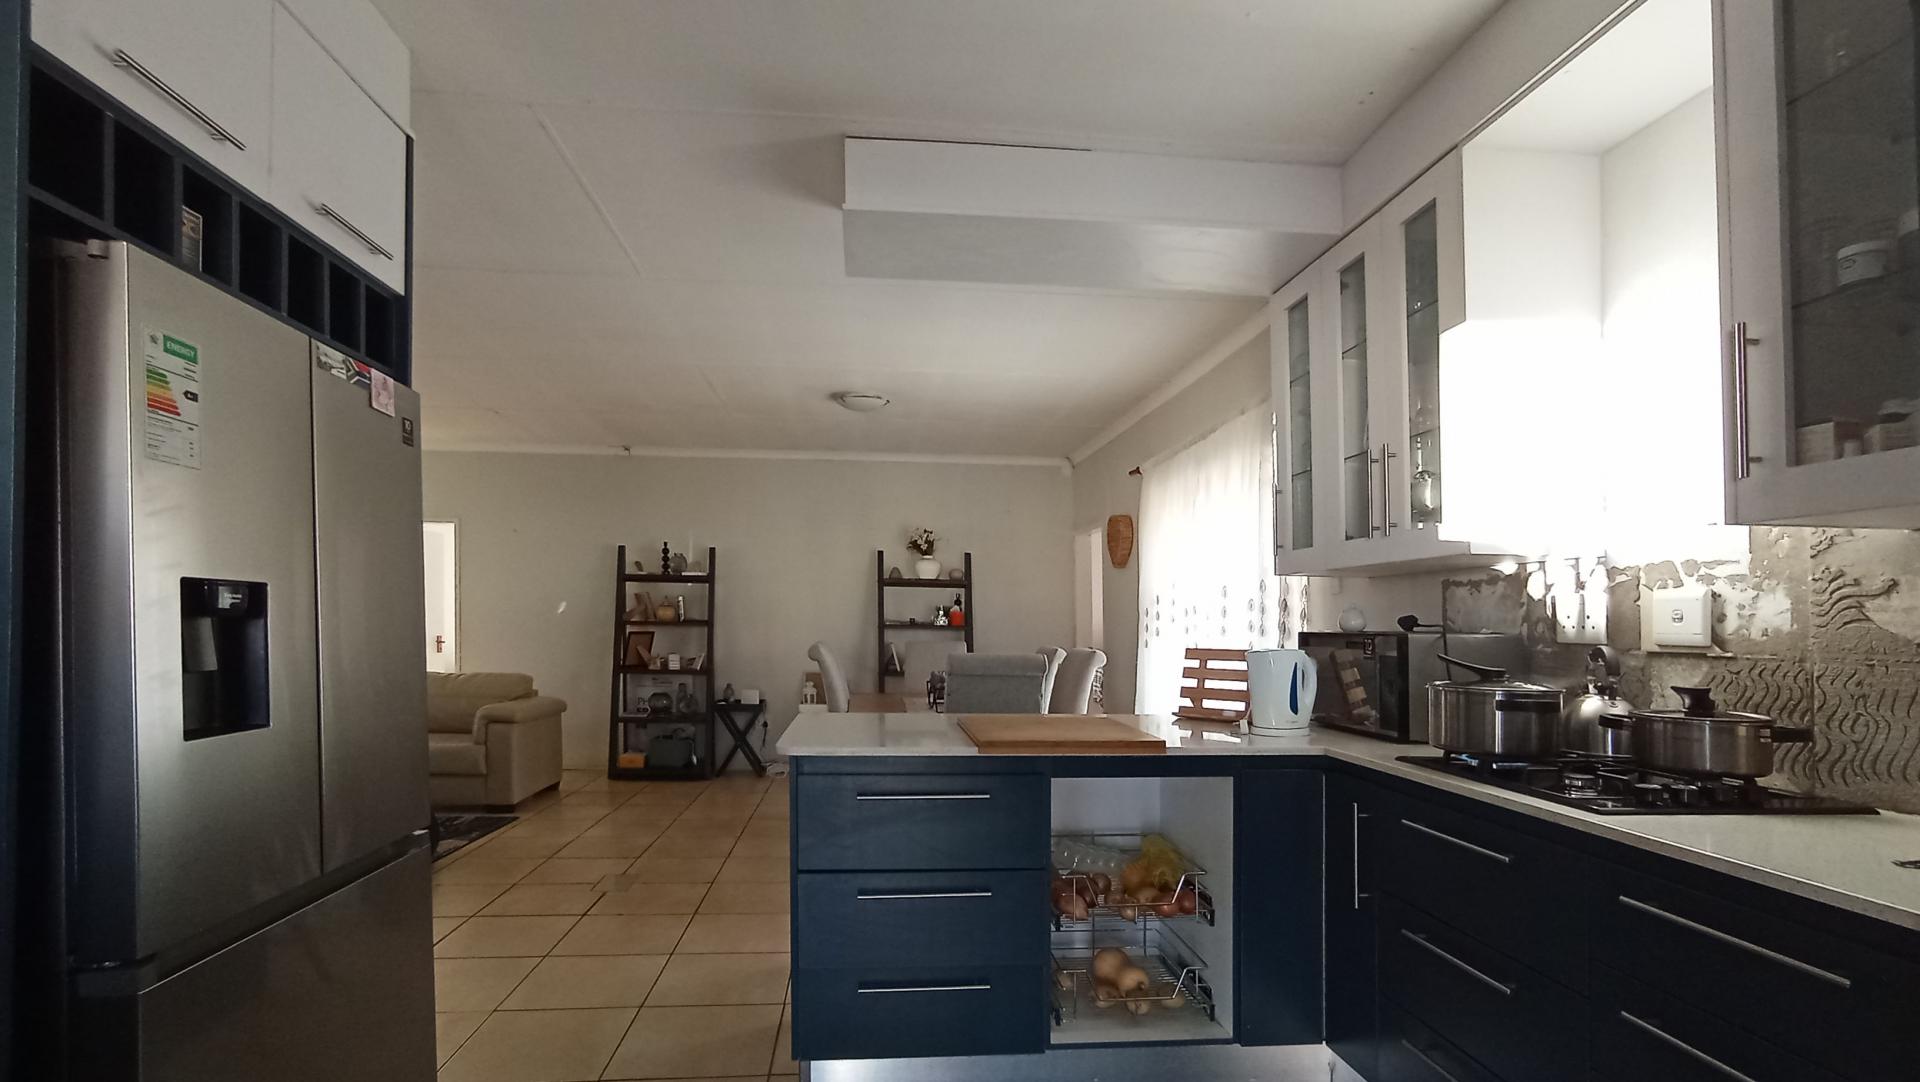 Kitchen - 17 square meters of property in Hesteapark